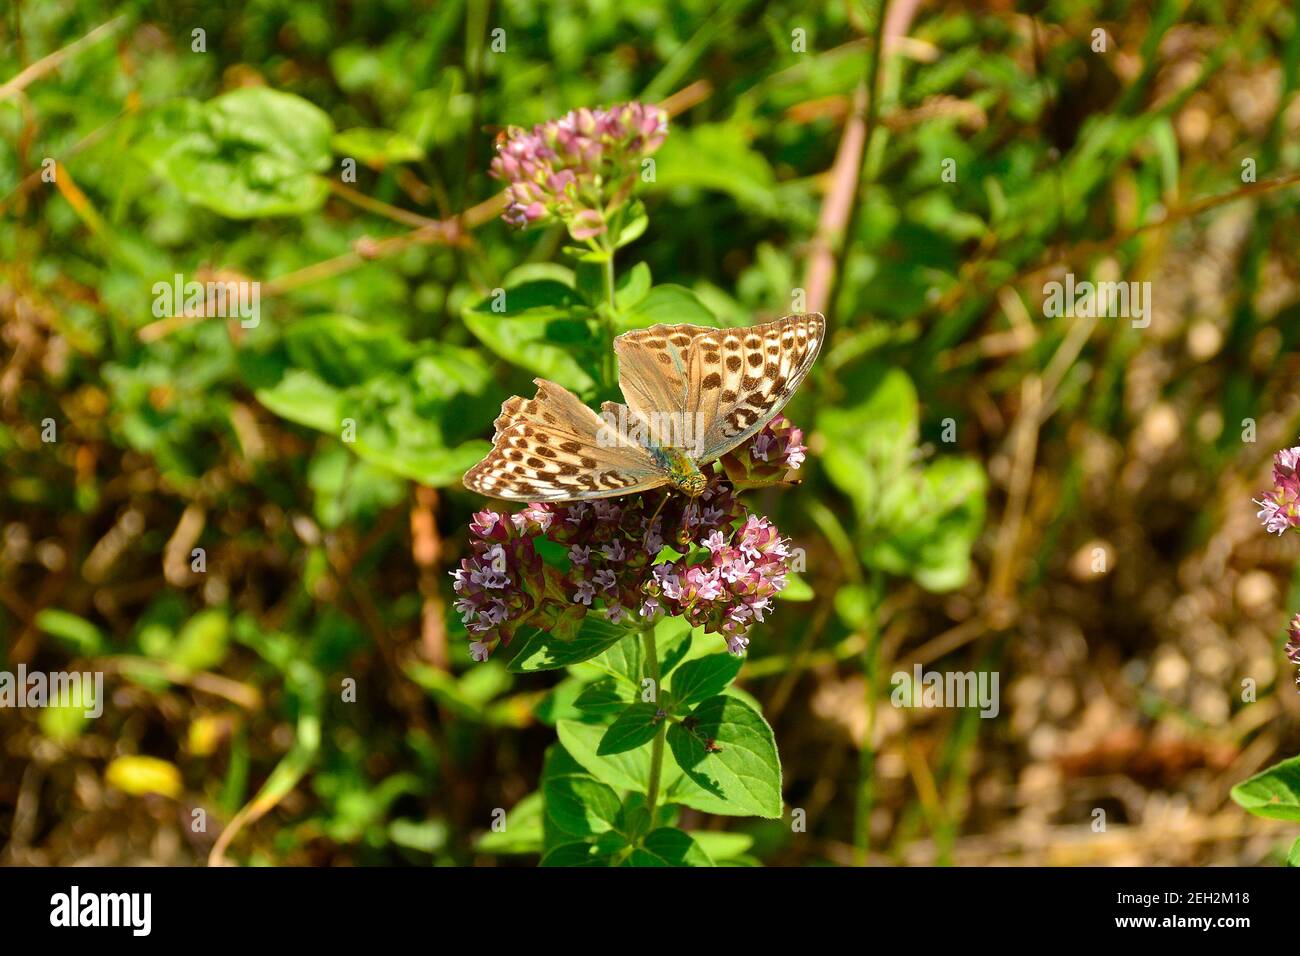 A female Silver Washed Fritillary Butterfly in north east Italy. They are on the flowers of the perrenial herb Asclepias Syriaca, AKA Common Milk Weed Stock Photo